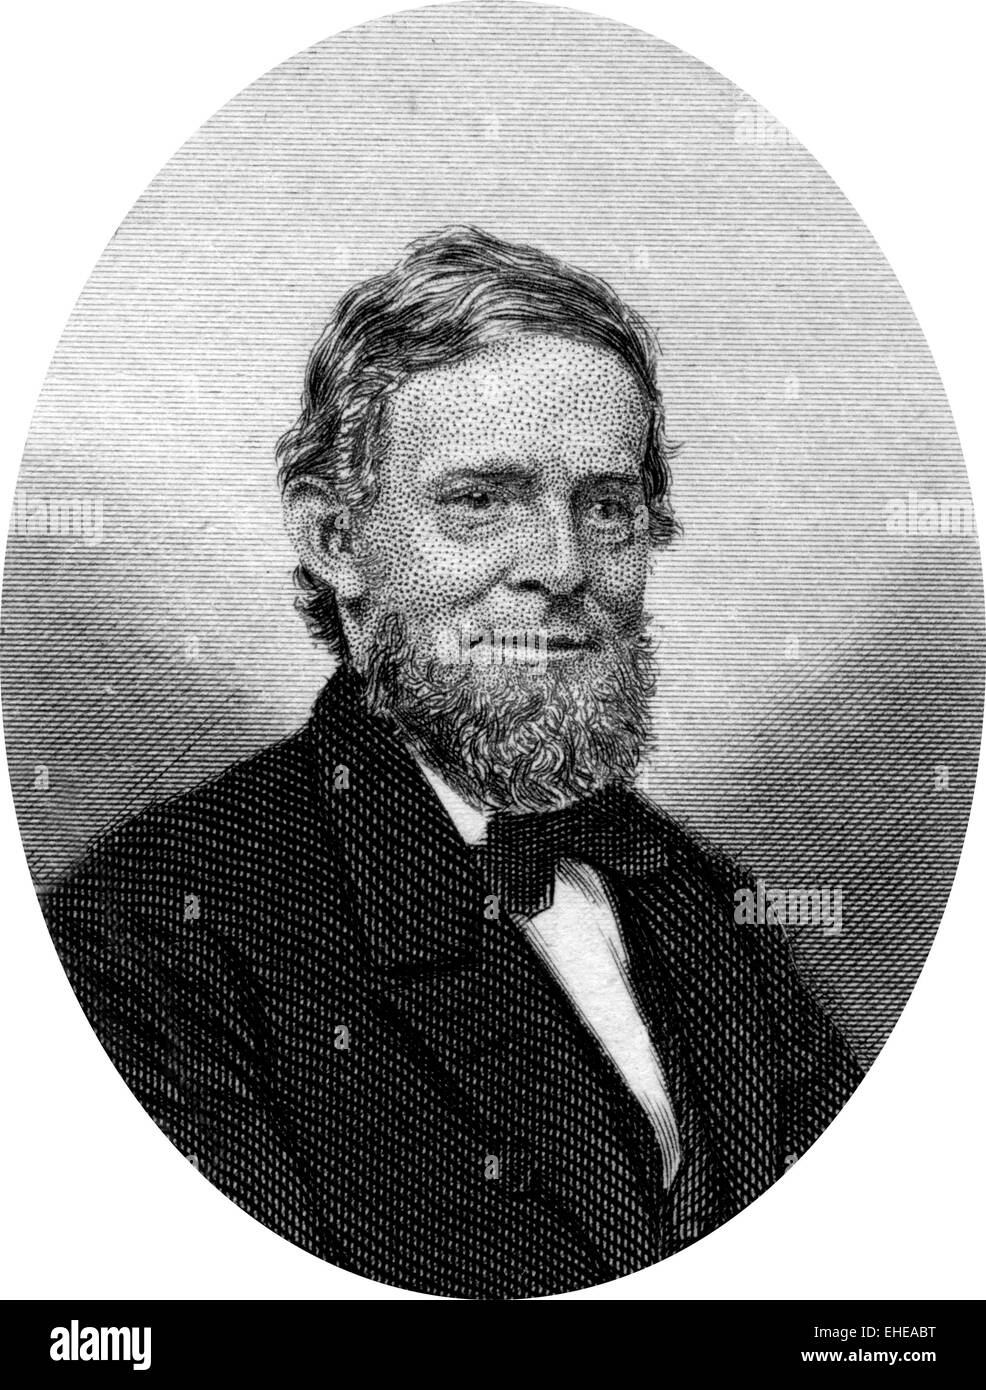 Engraving of Schuyler Colfax, Jr. ( March 23, 1823 – January 13, 1885), 17th Vice President of the United States Stock Photo